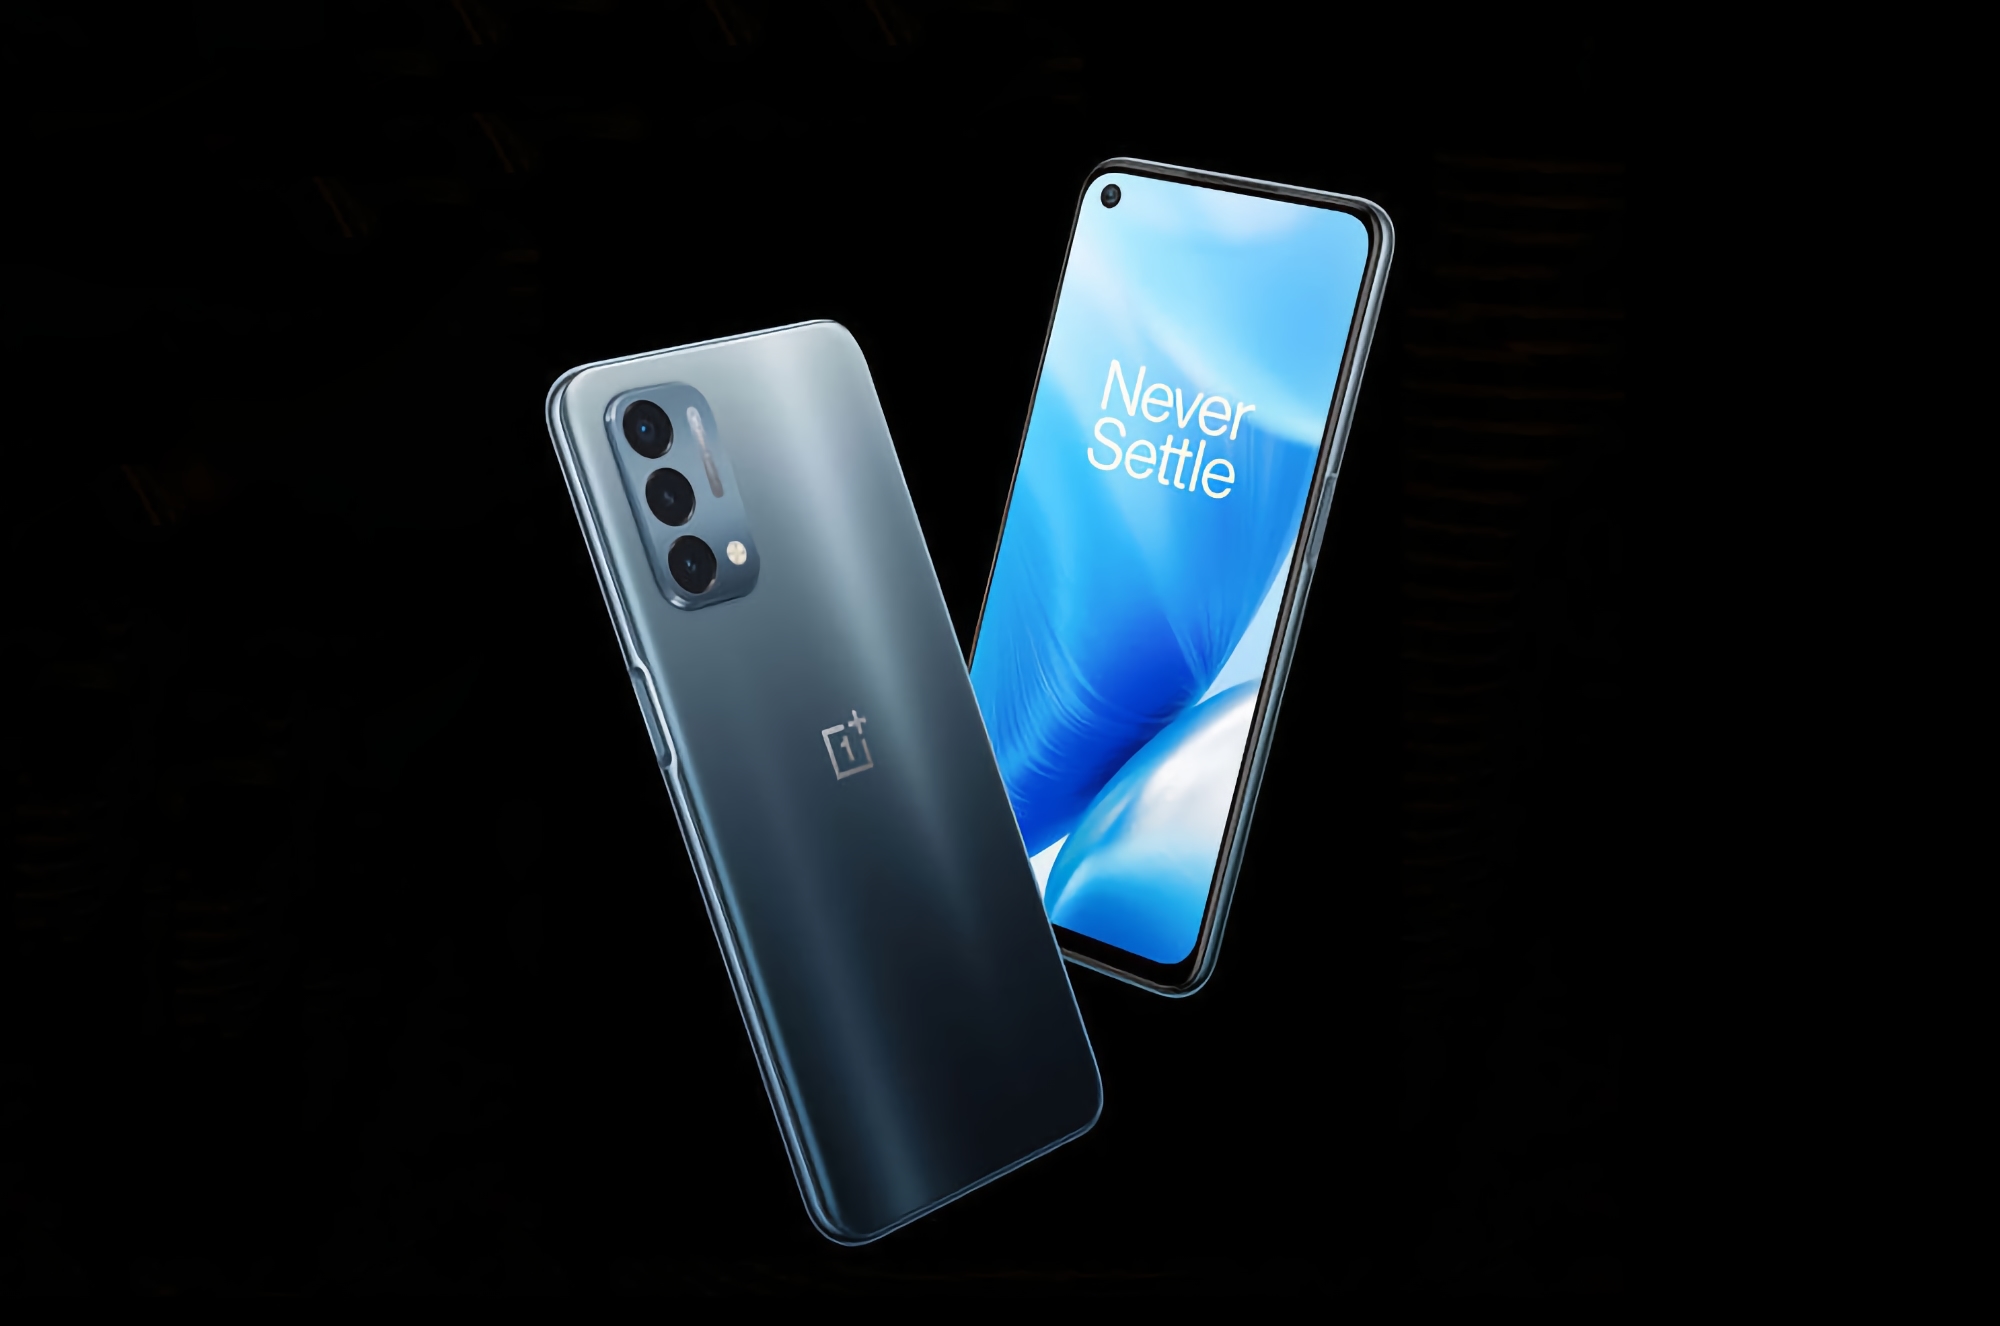 Source: OnePlus is working on a new Nord smartphone, it will have a 90Hz display, 5G, a 50MP camera and will cost less than $270